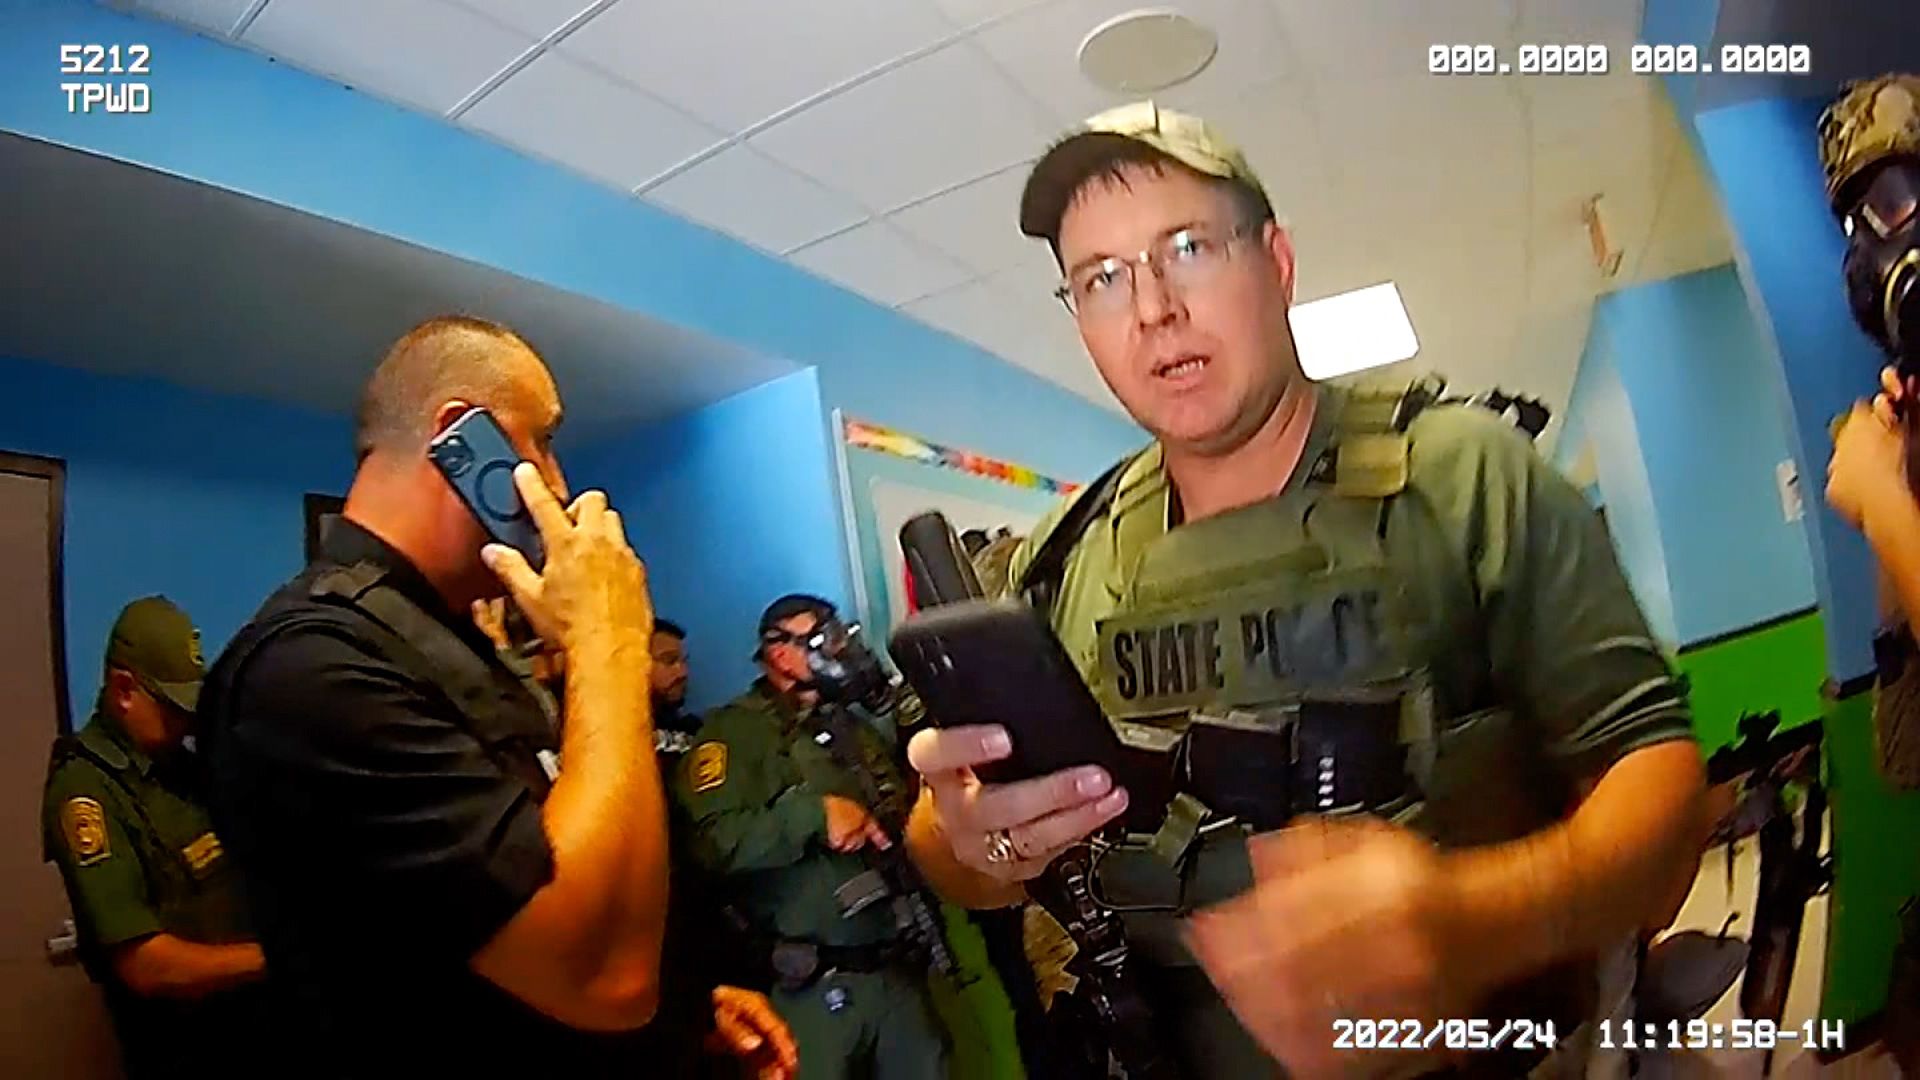 A photo shows body cam footage of Texas Ranger Ryan Kindell the day of the Uvalde massacre. Kindell looks at the camera while holding up his phone. Officers in the background are also on their phones. 